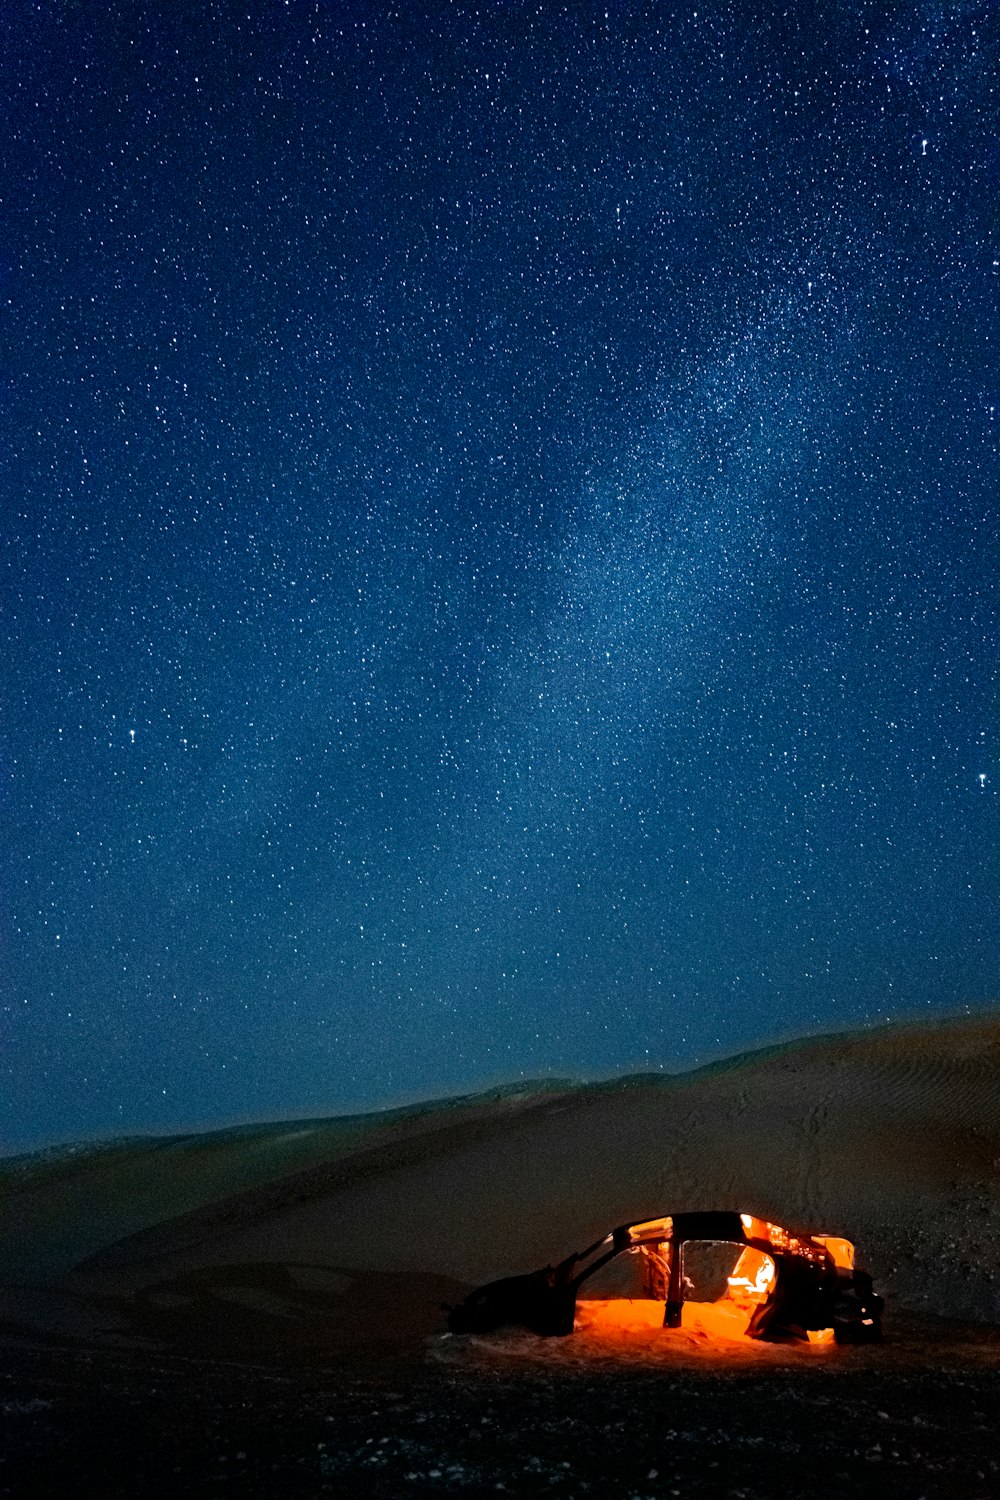 a tent in the middle of a desert under a night sky filled with stars